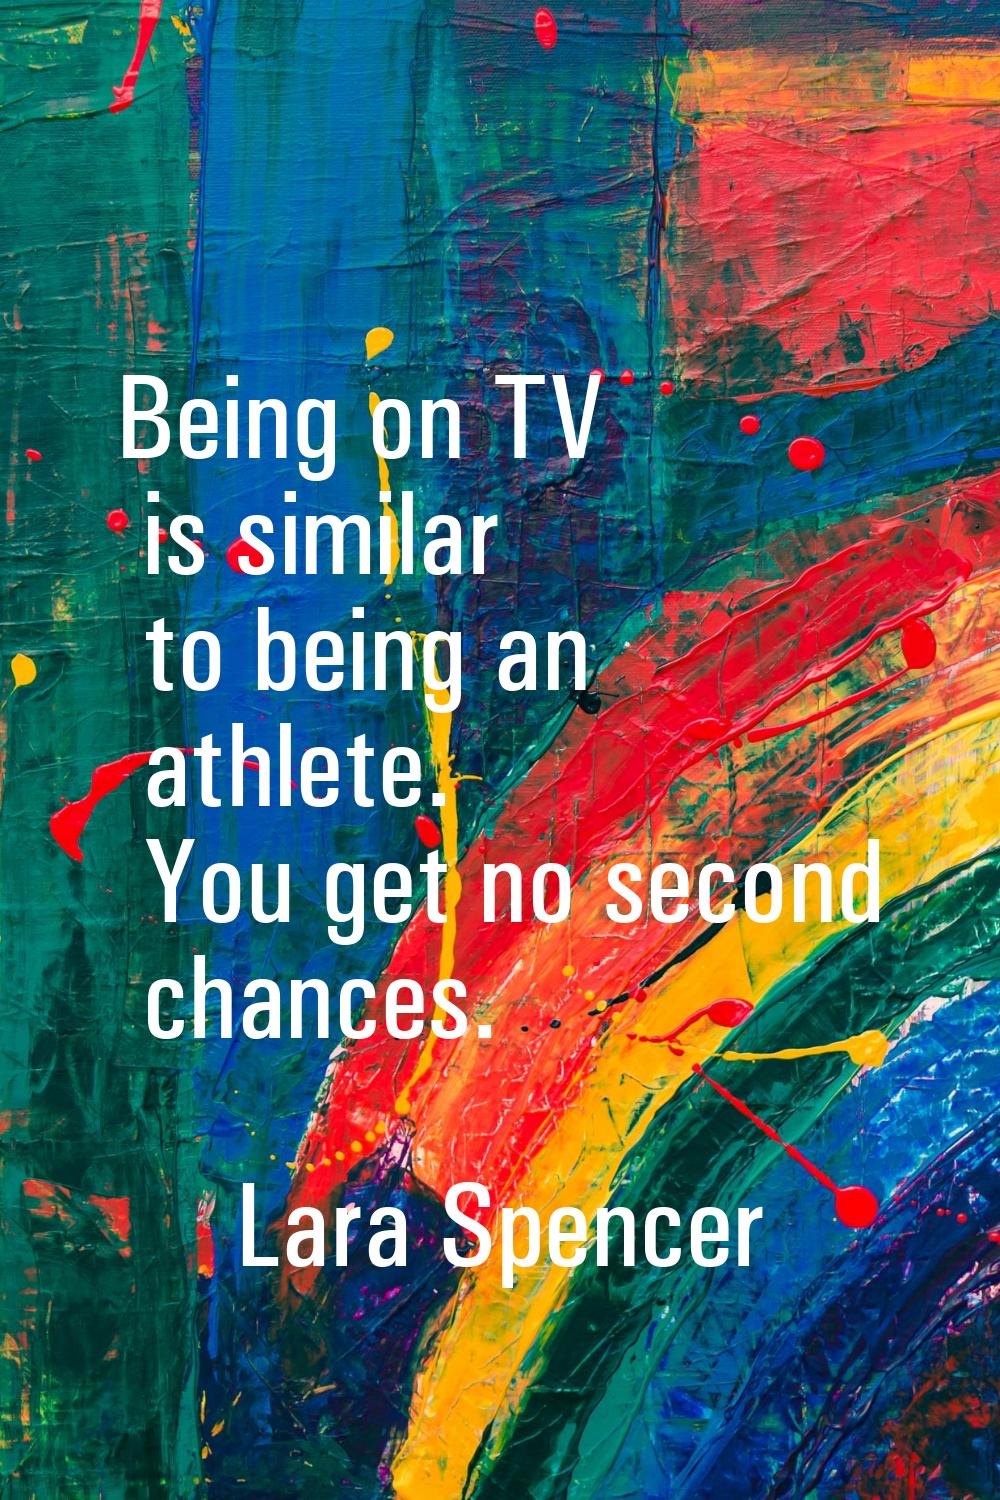 Being on TV is similar to being an athlete. You get no second chances.